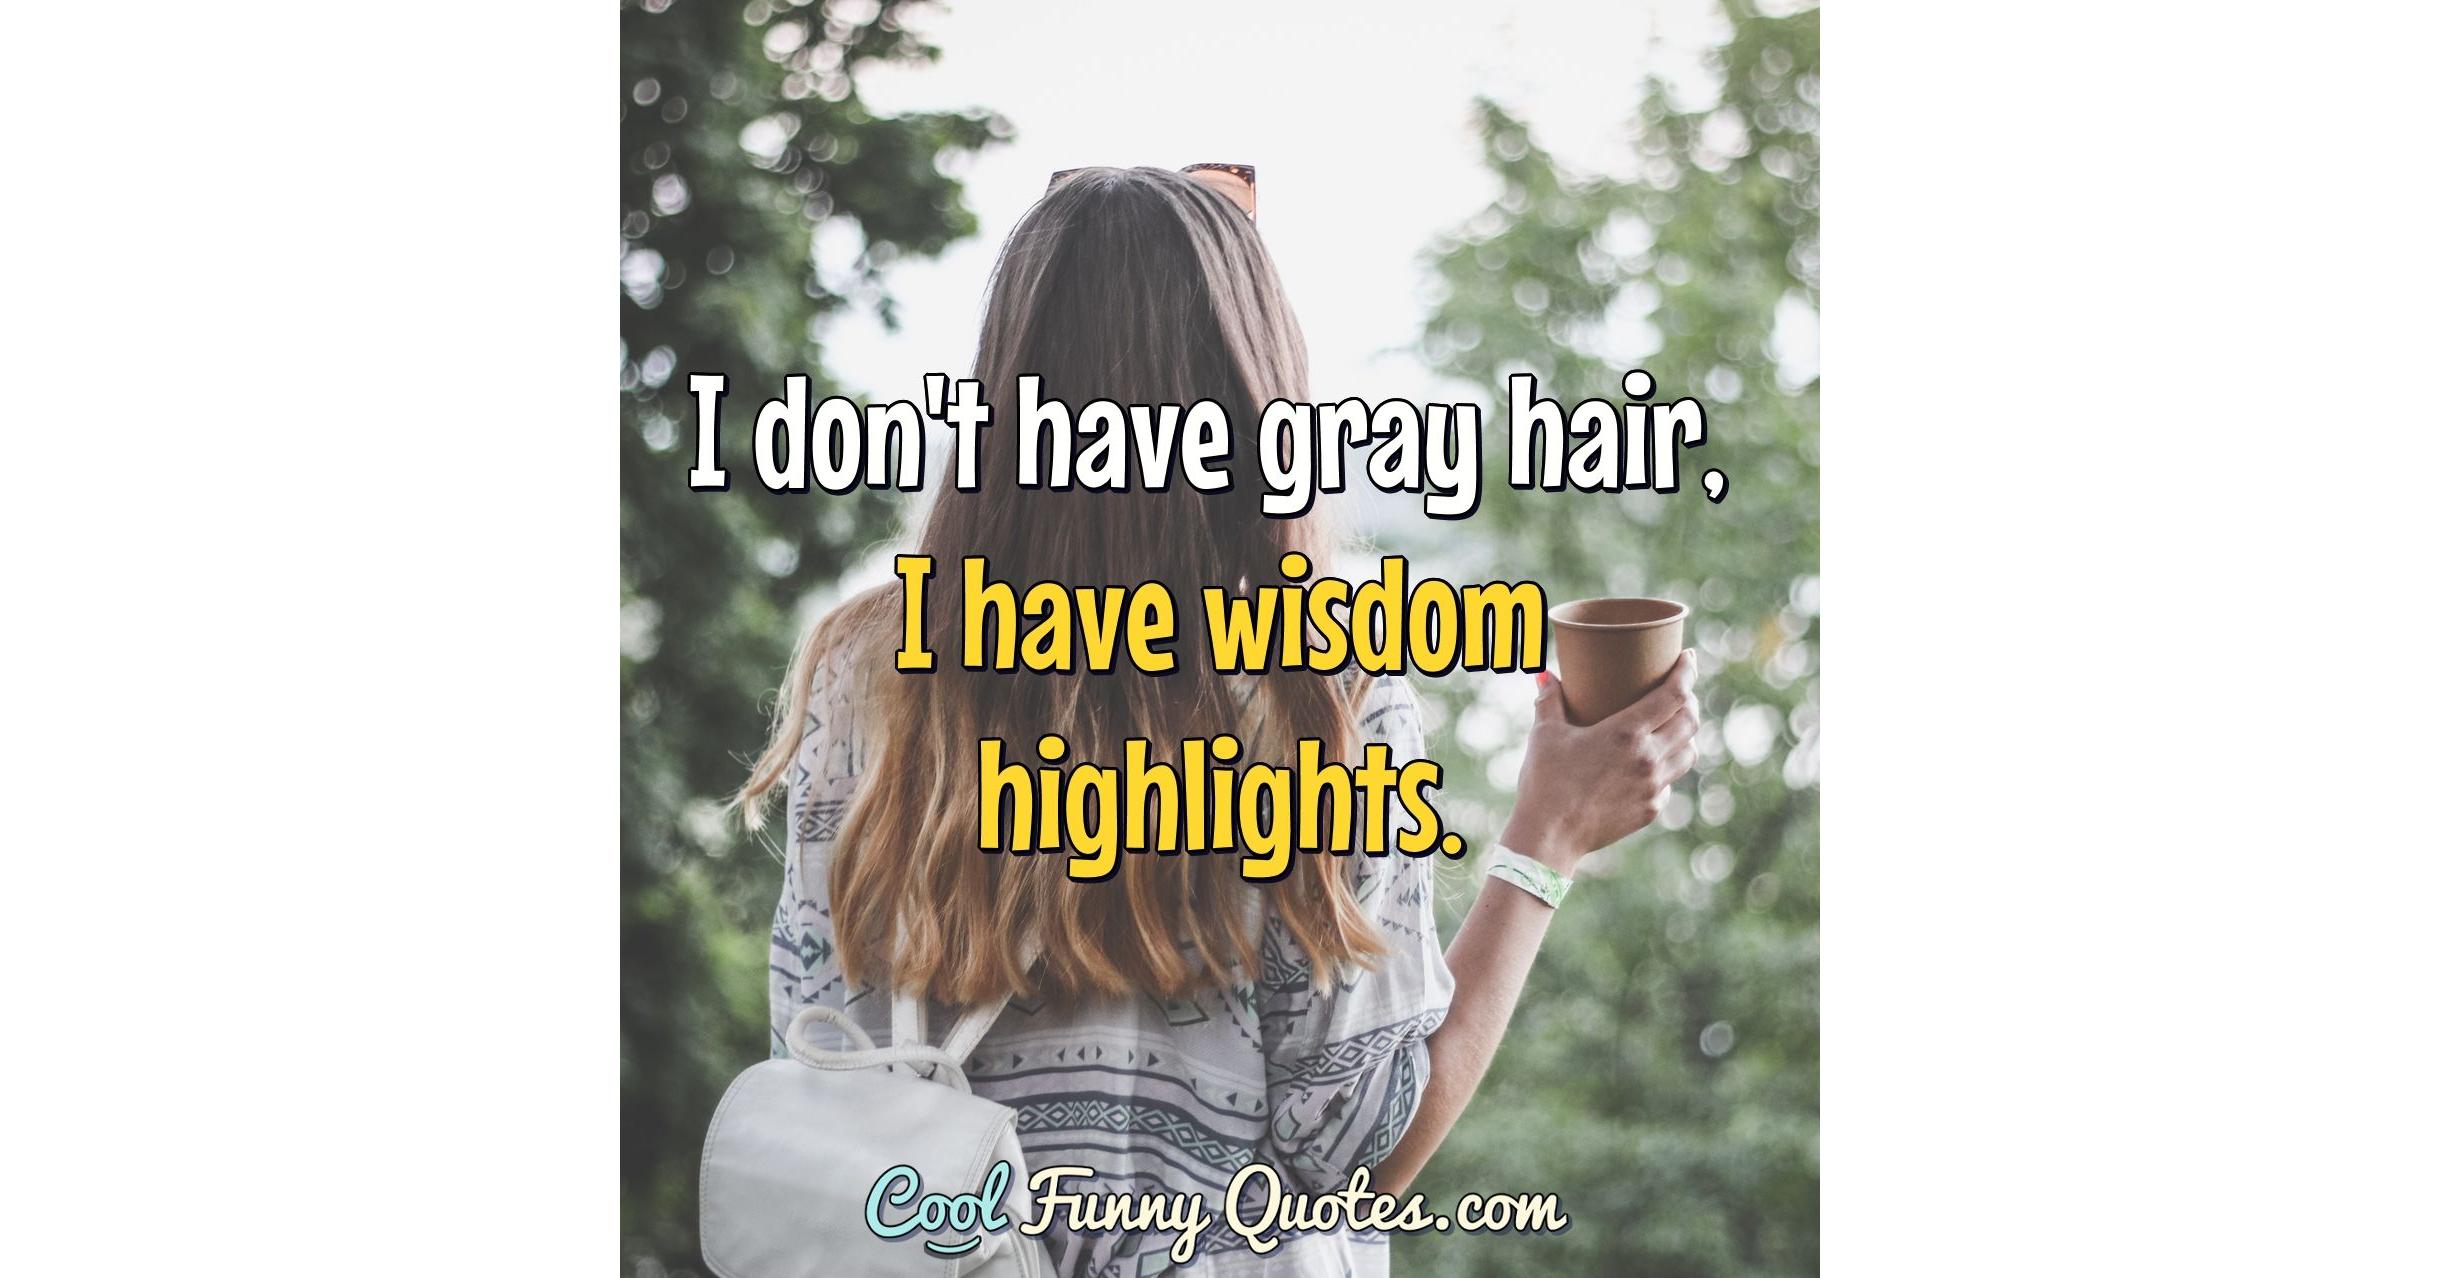 I don't have gray hair, I have wisdom highlights.